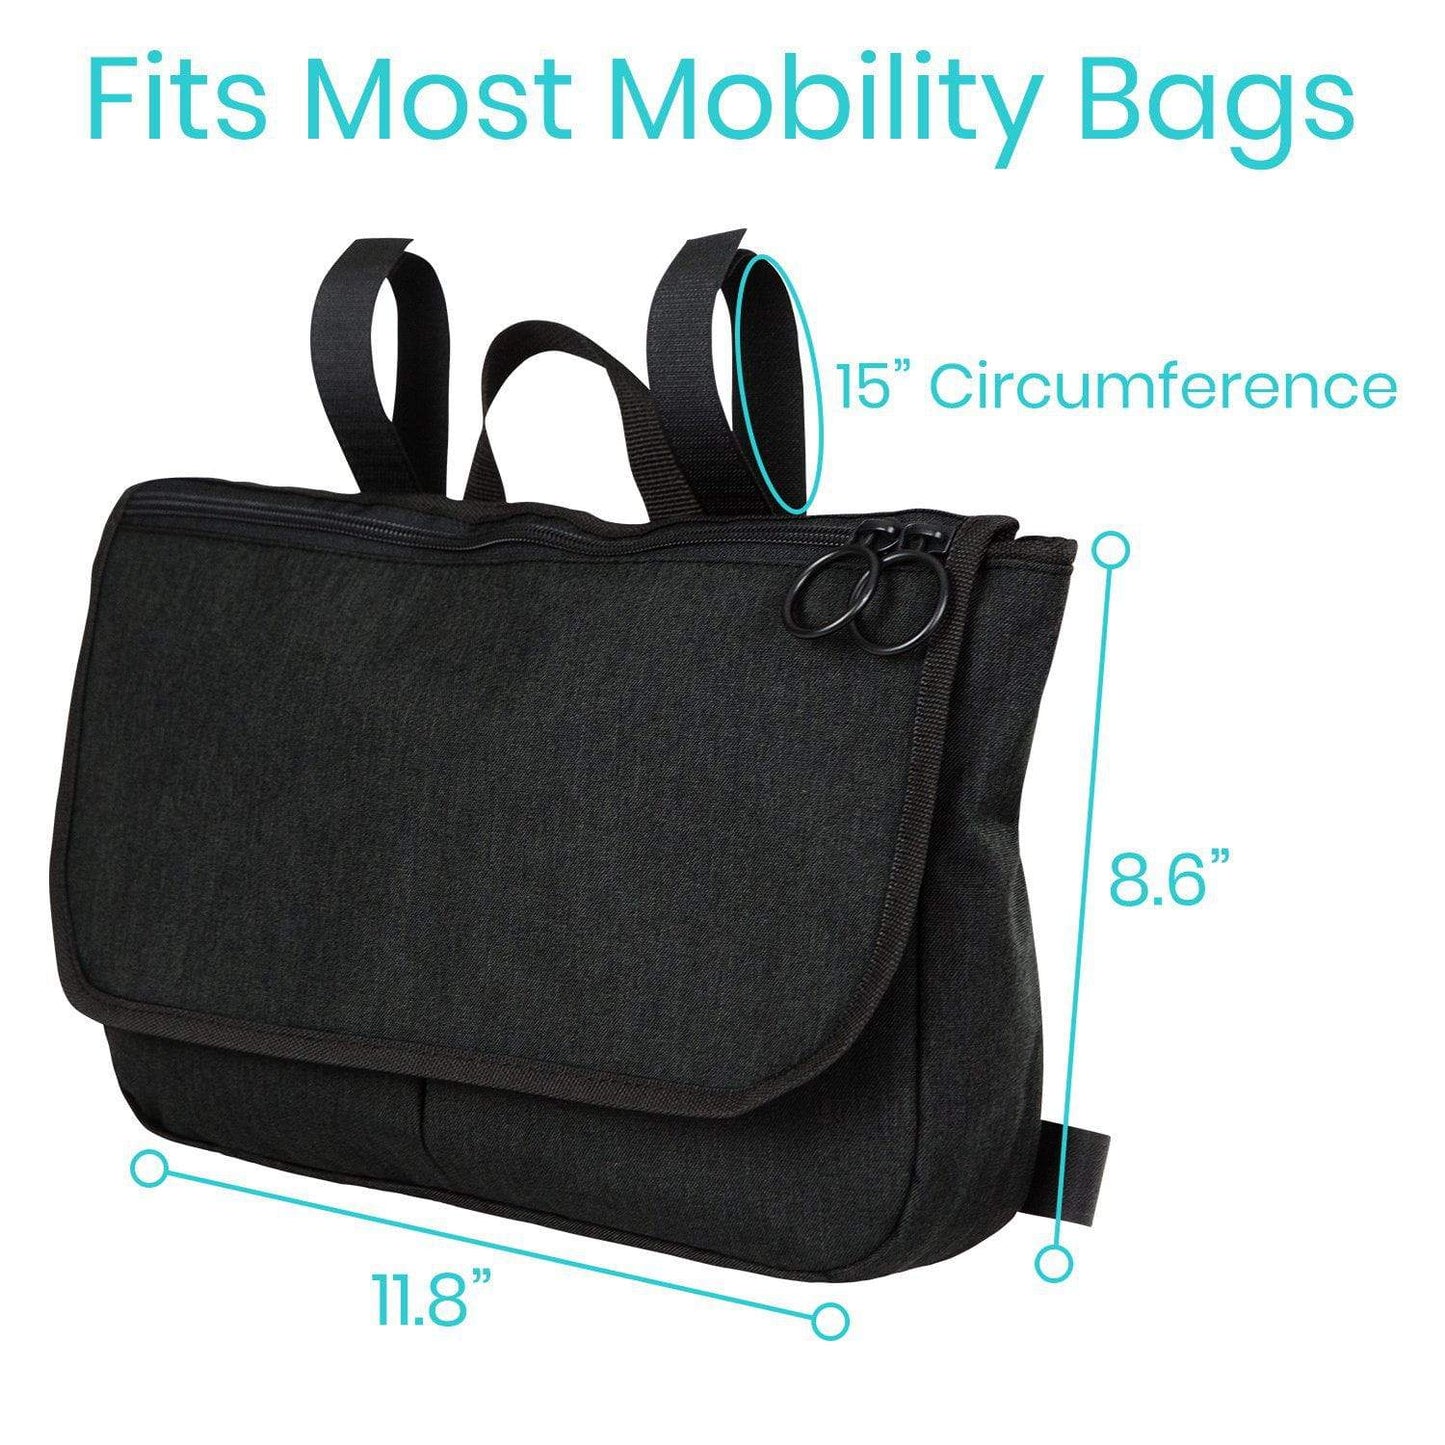 mobility side bag dimensions from AskSAMIE